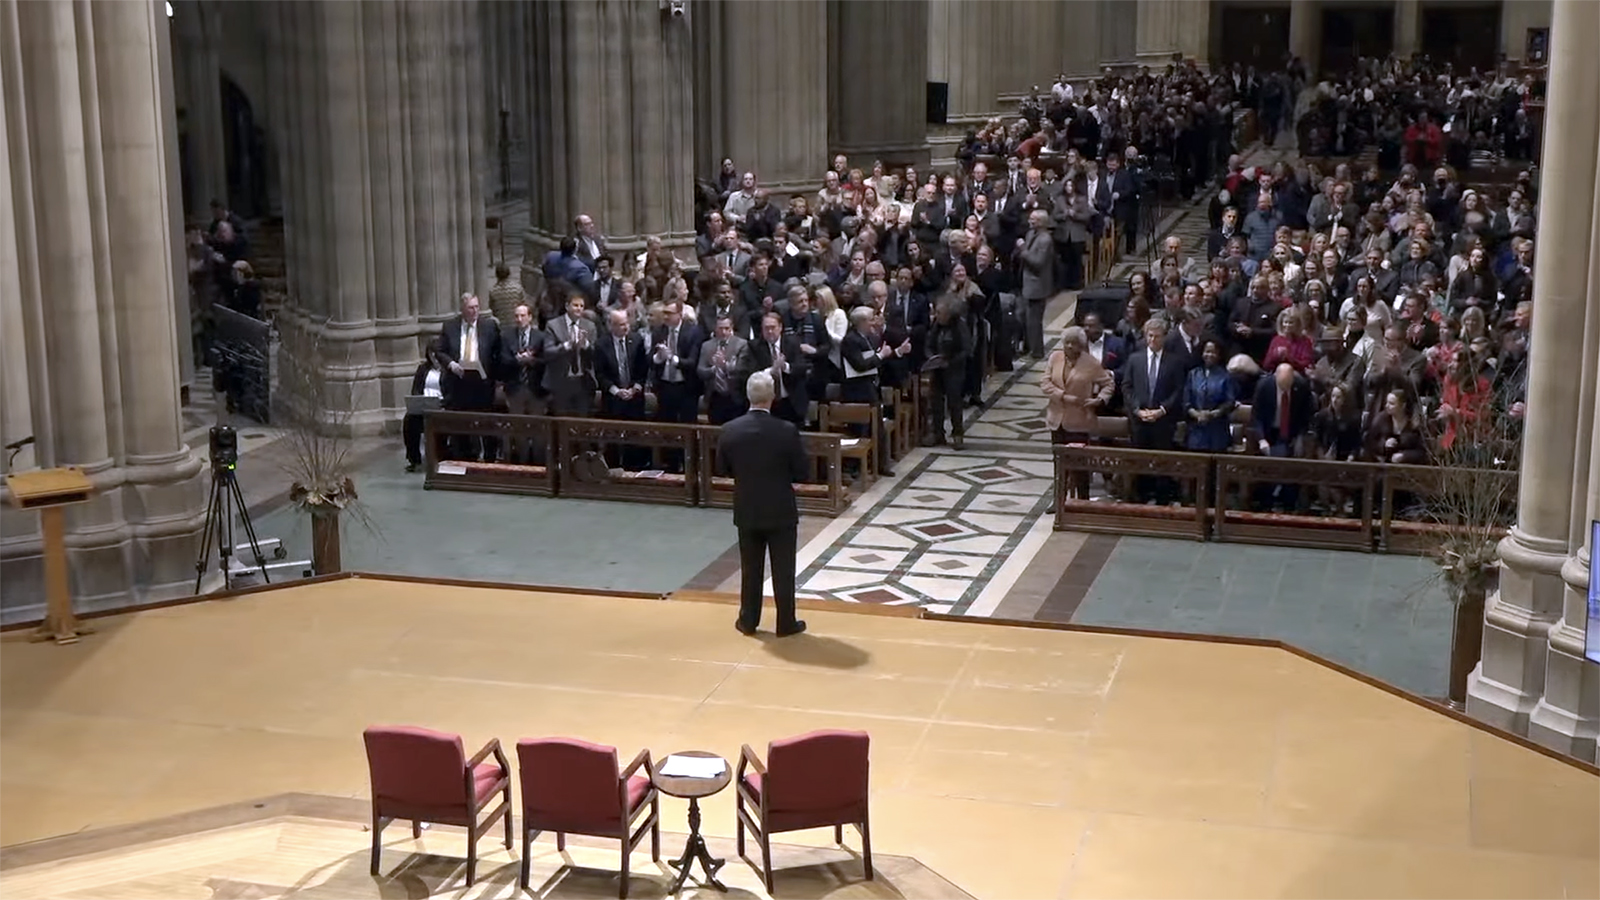 Dean Randy Hollerith addresses attendees of the “With Malice Toward None, With Charity for All: Reclaiming Civility in American Politics" program at the Washington National Cathedral, Wed. Feb. 22, 2024. (Video screen grab)